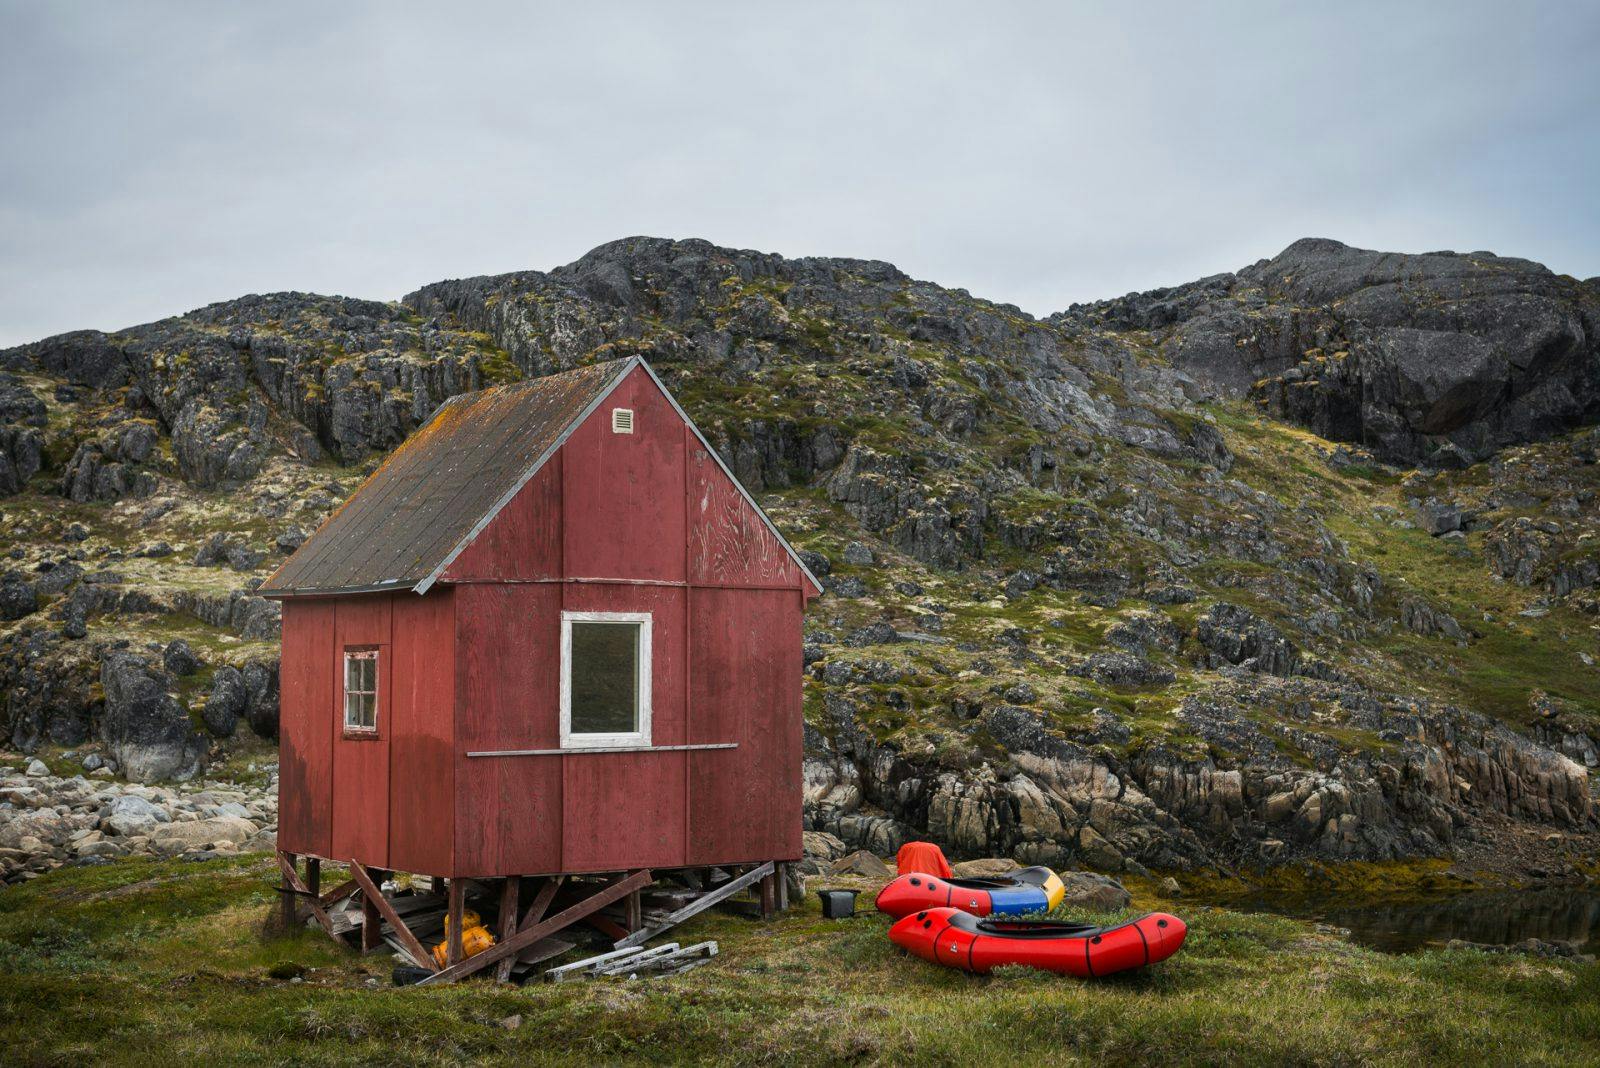 &quot;These shacks are used by local fishermen and hunters, they are usually open. We were lucky to find one shortly before it started raining, spent a night inside.&quot;